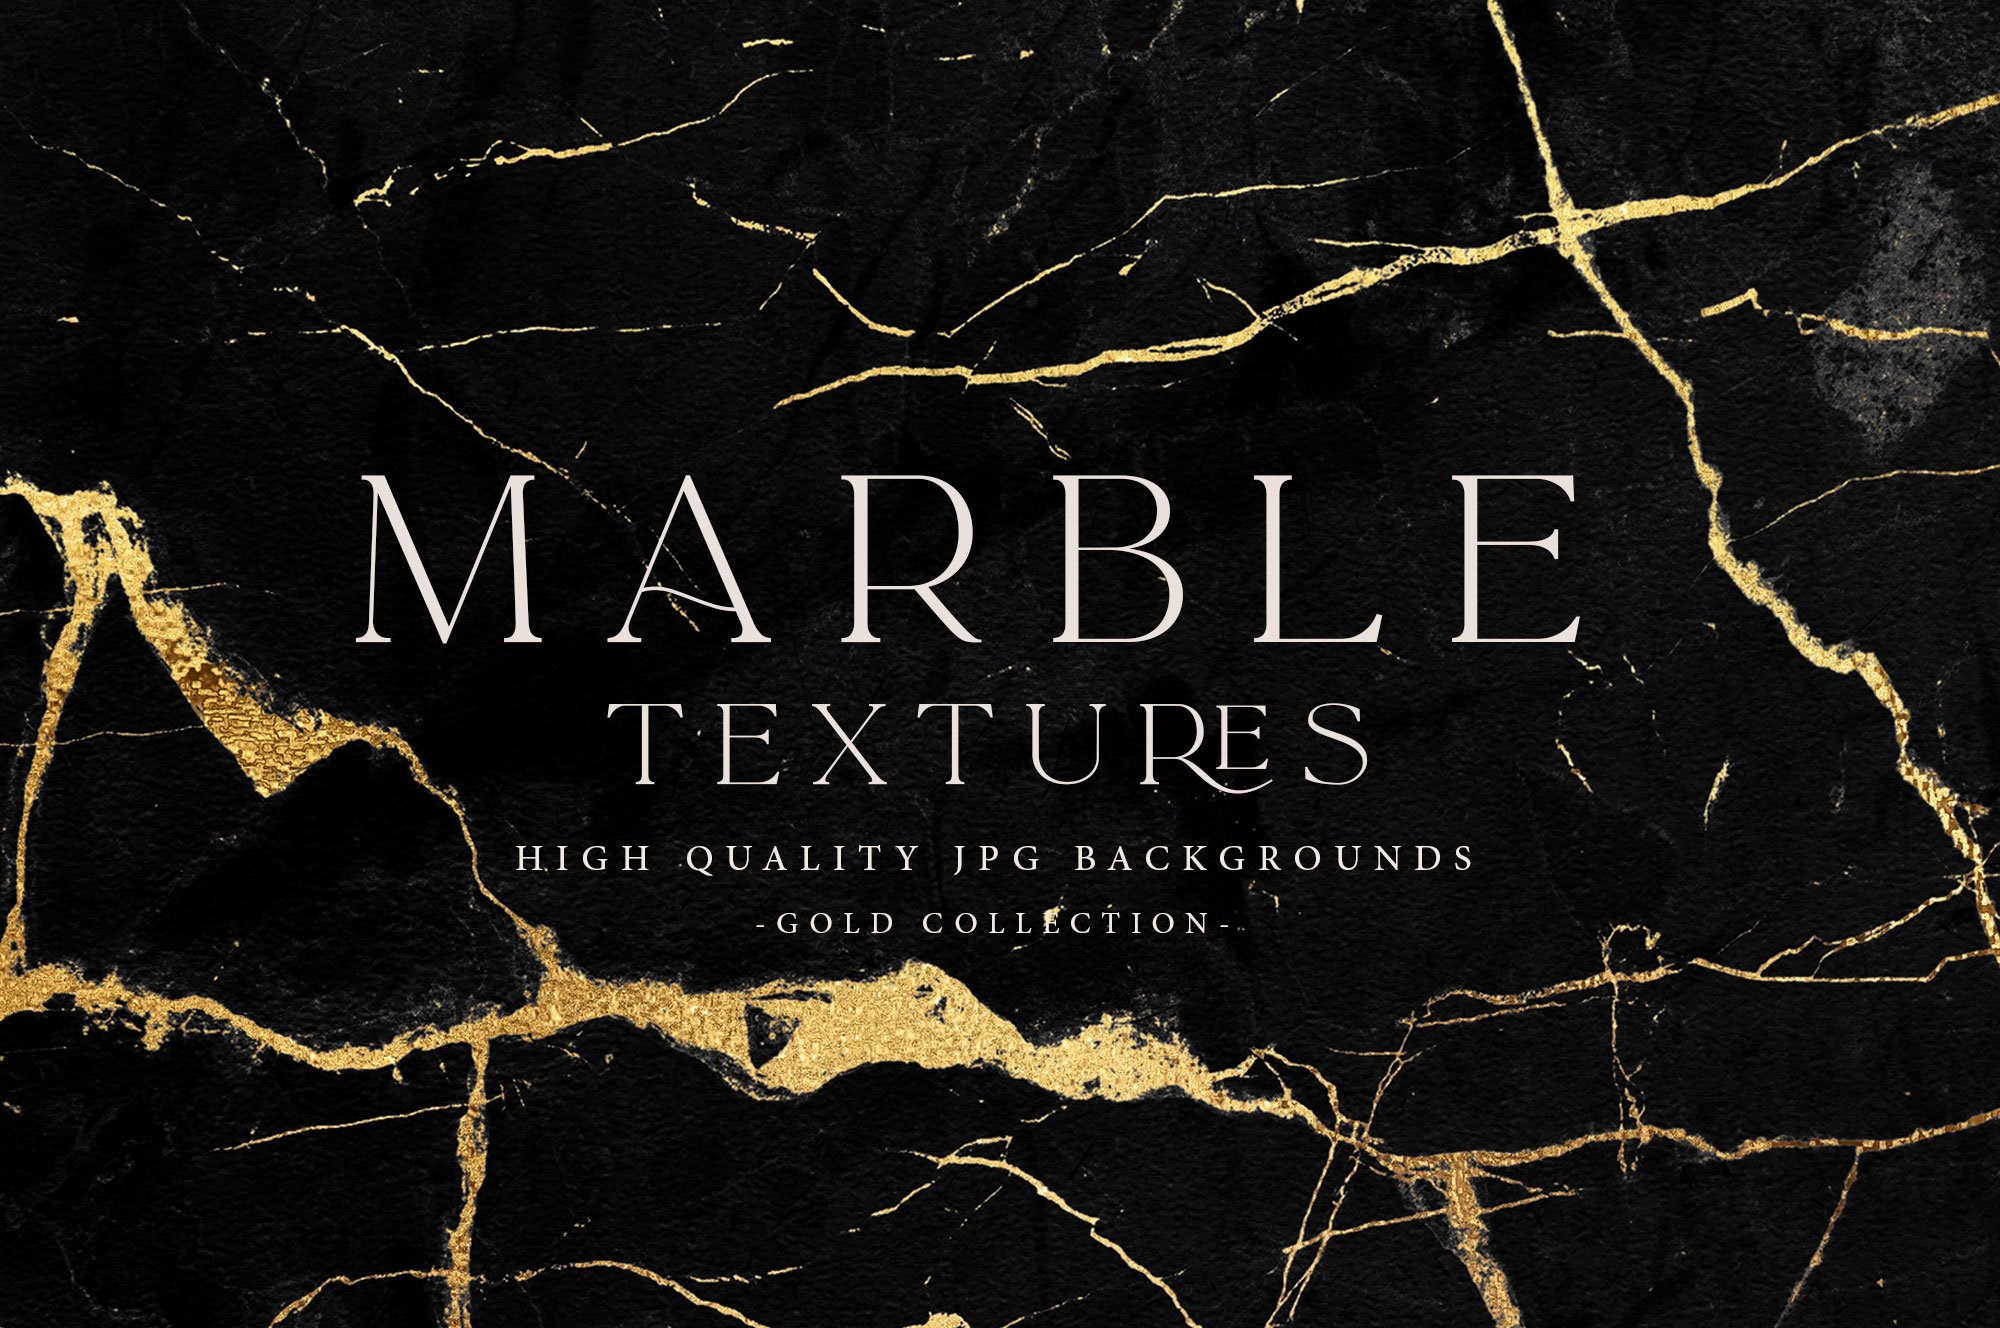 Gold Black Marble Textures cover image.